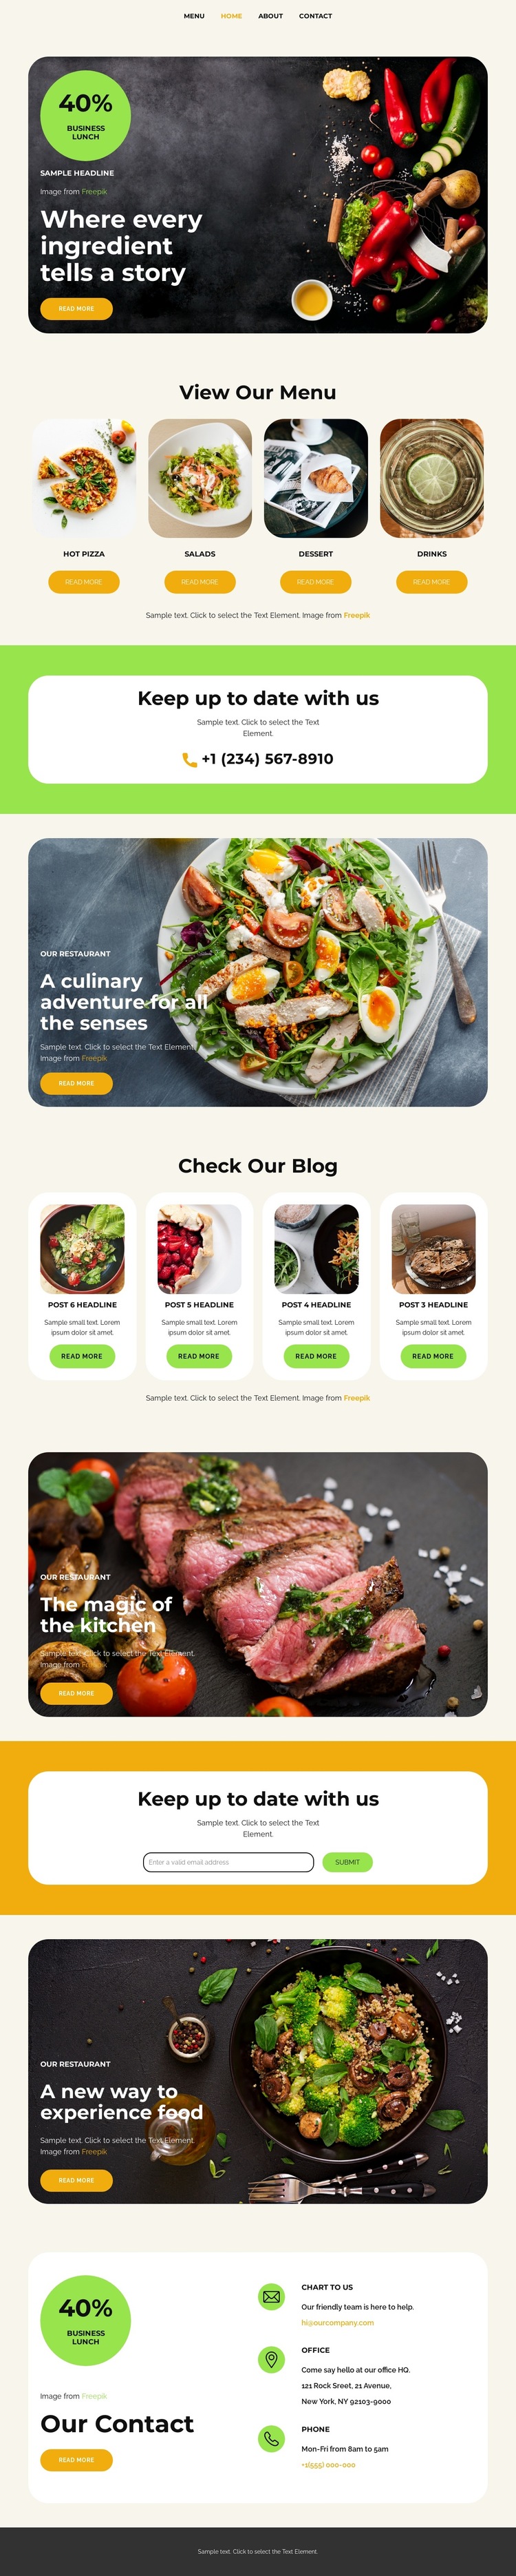 The magic of the kitchen HTML5 Template